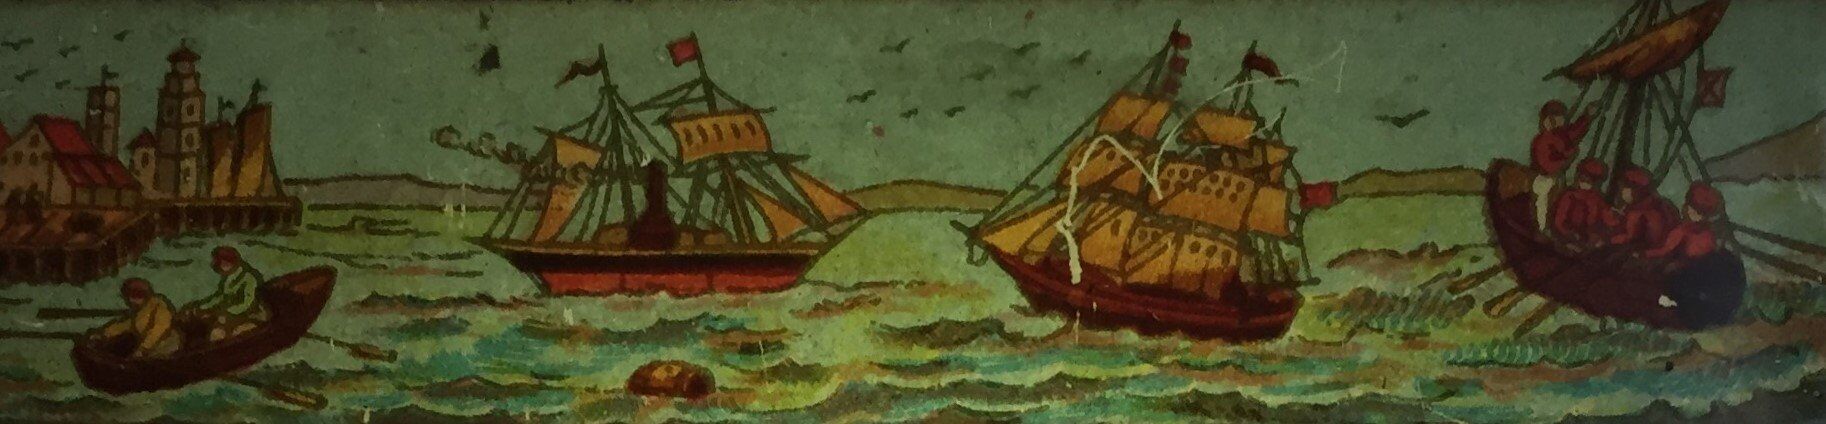 Historic lantern slide-that supports the notion of refugees fleeing on boats, across the sea